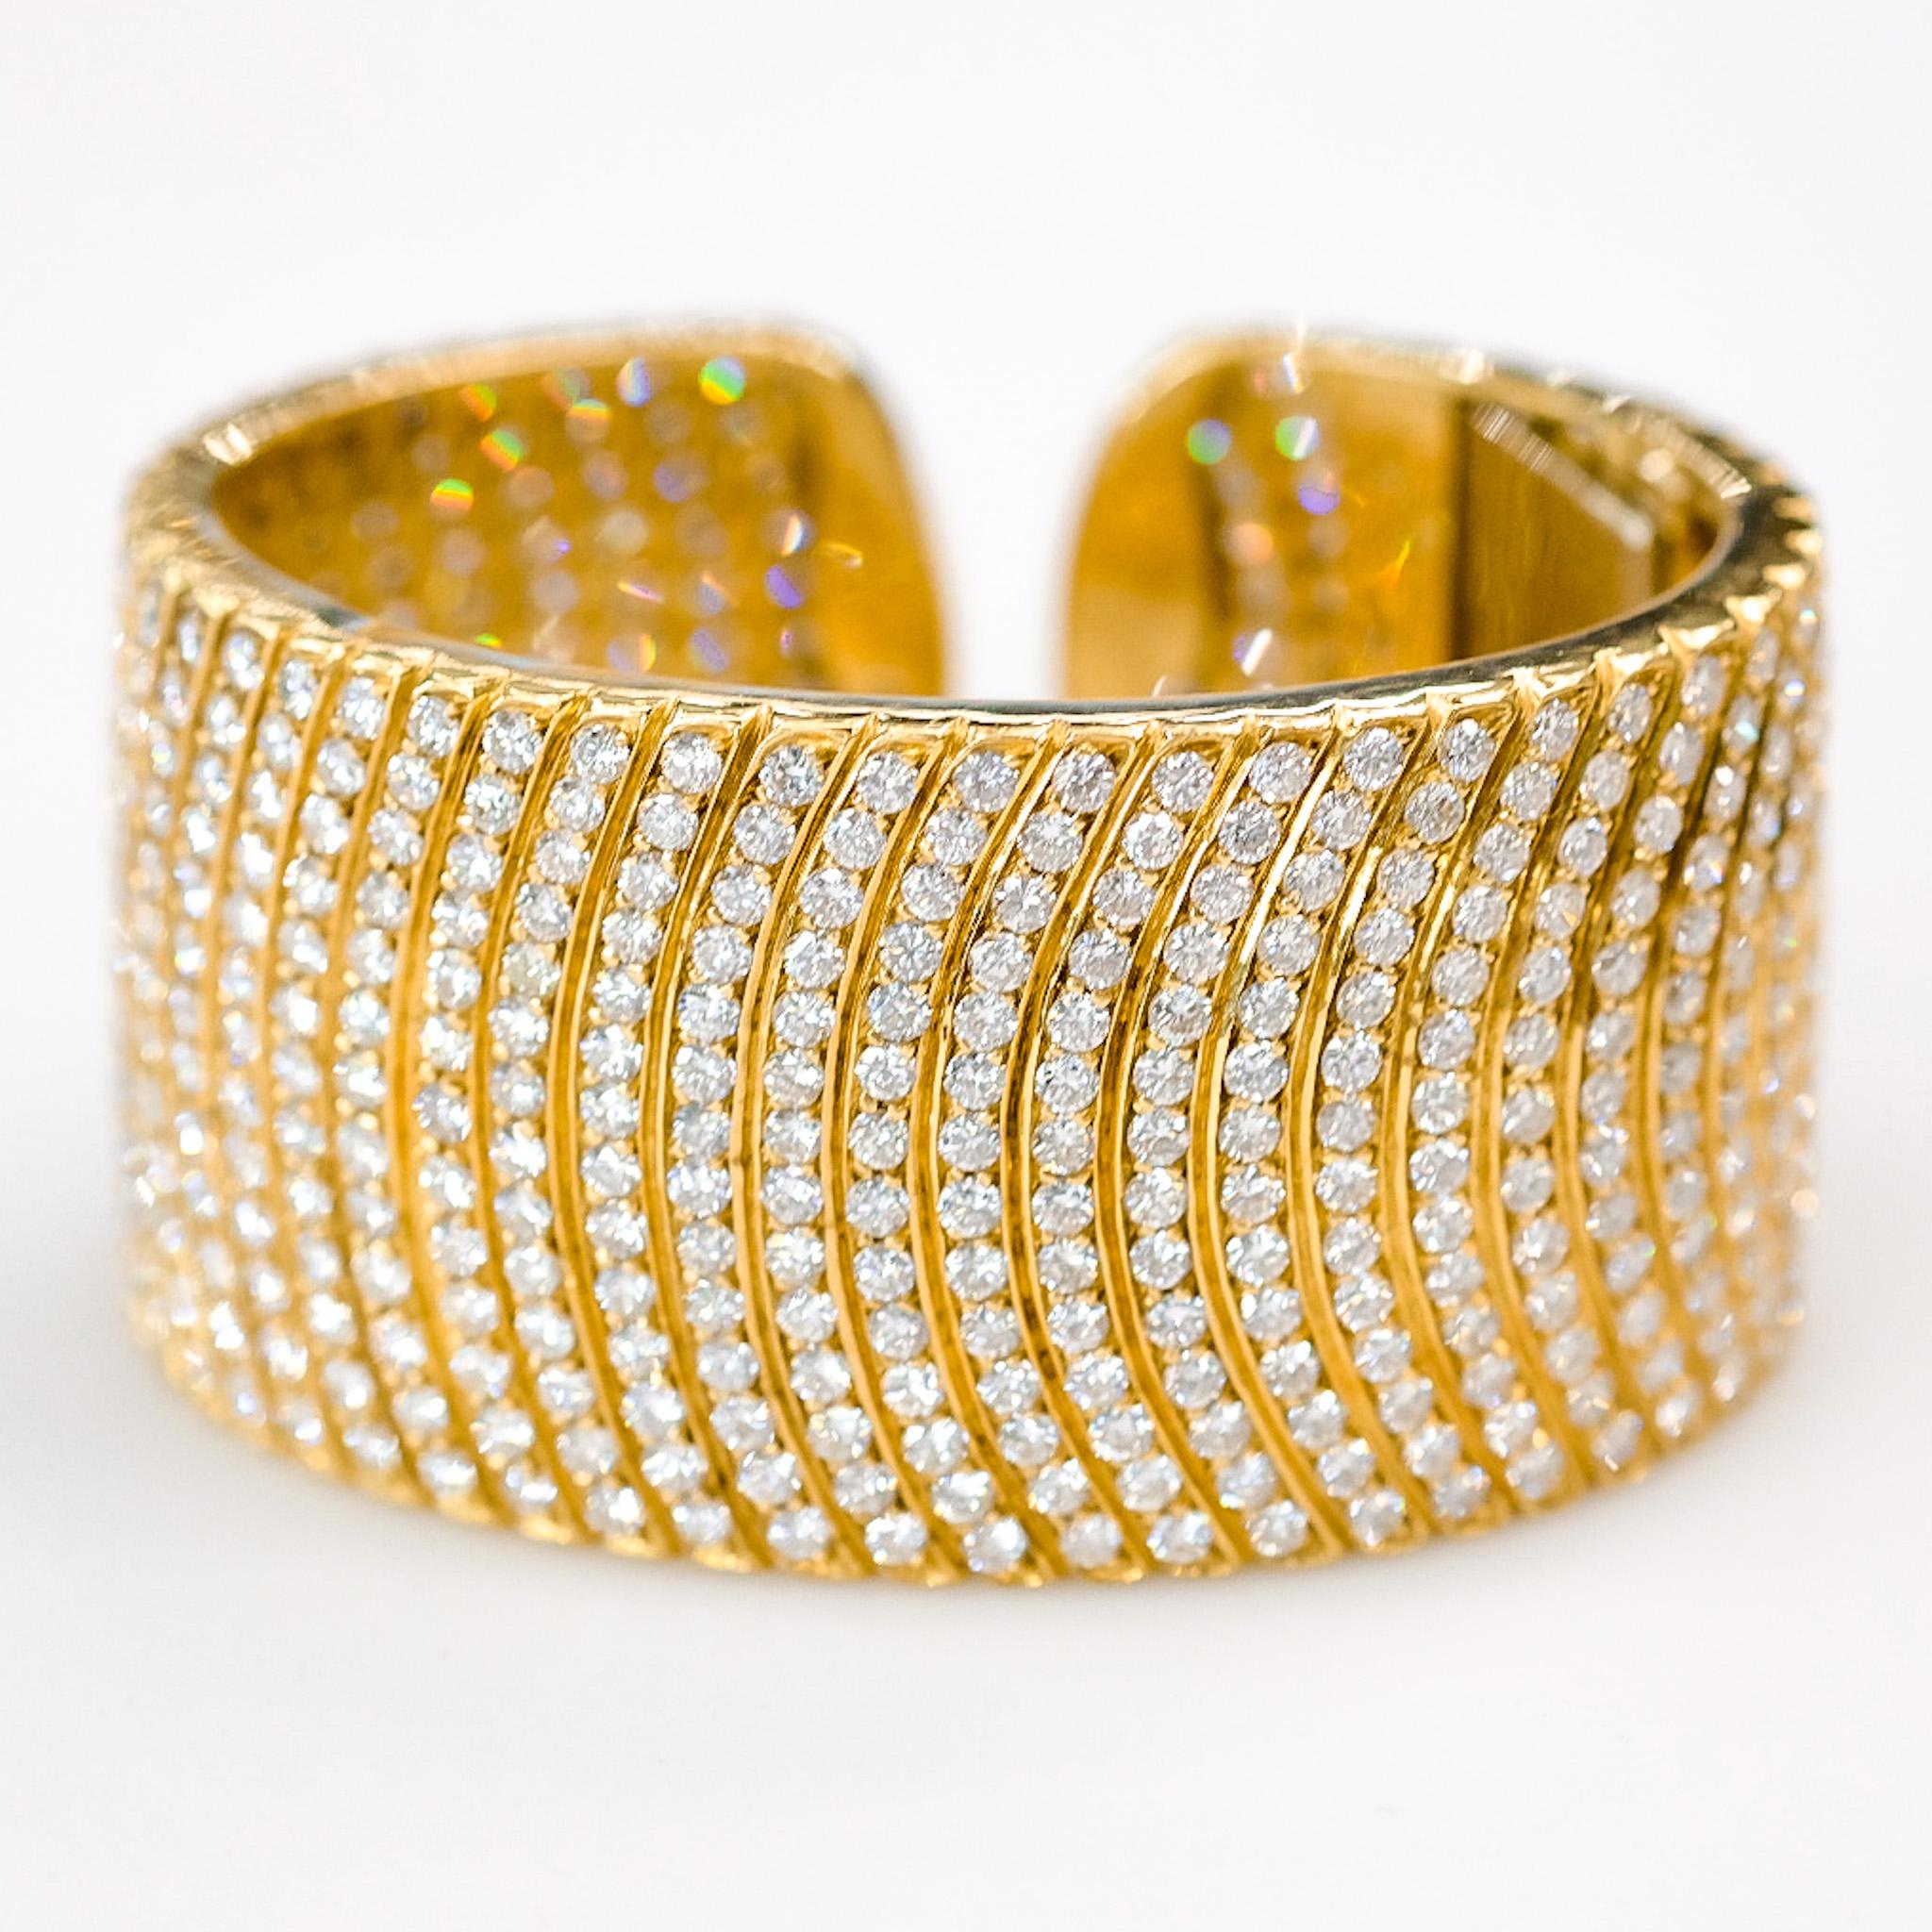 32 Carats 18K Yellow Gold Exceptional Diamond Cuff Bracelet In Excellent Condition For Sale In New York, NY